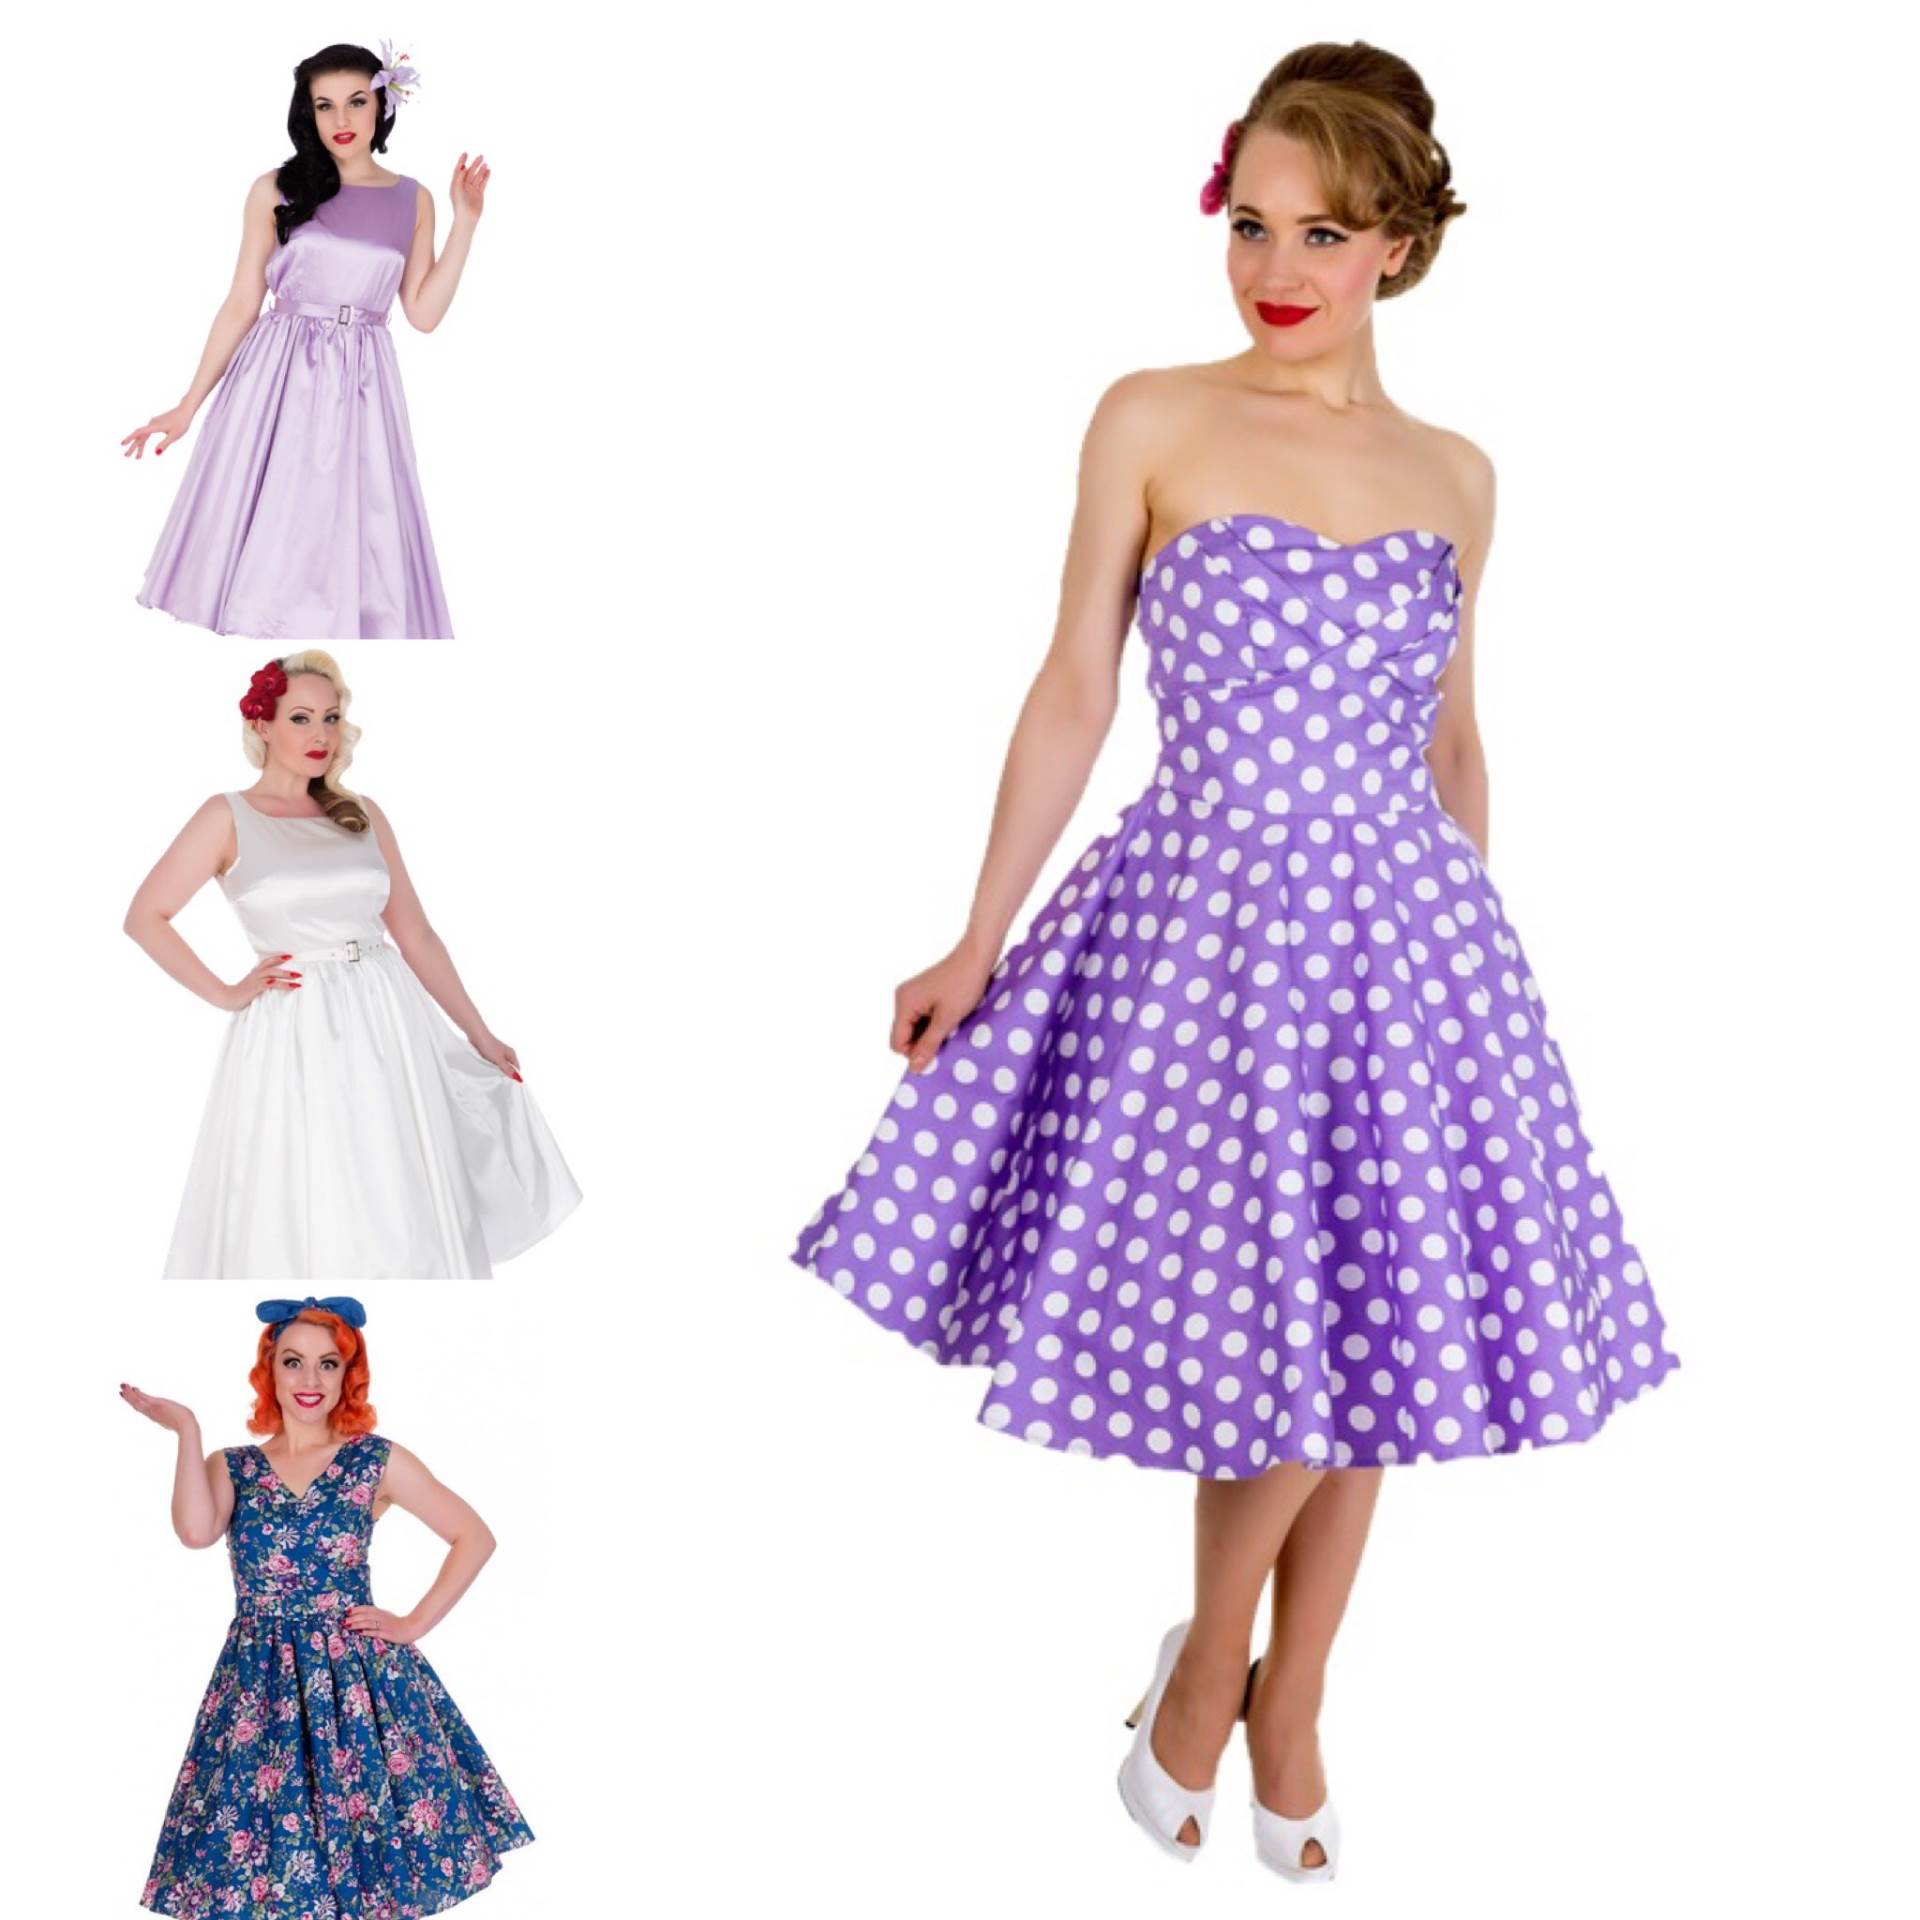 Vintage style bridesmaid dresses from Lucilles as featured on The National Vintage Wedding Fair blog